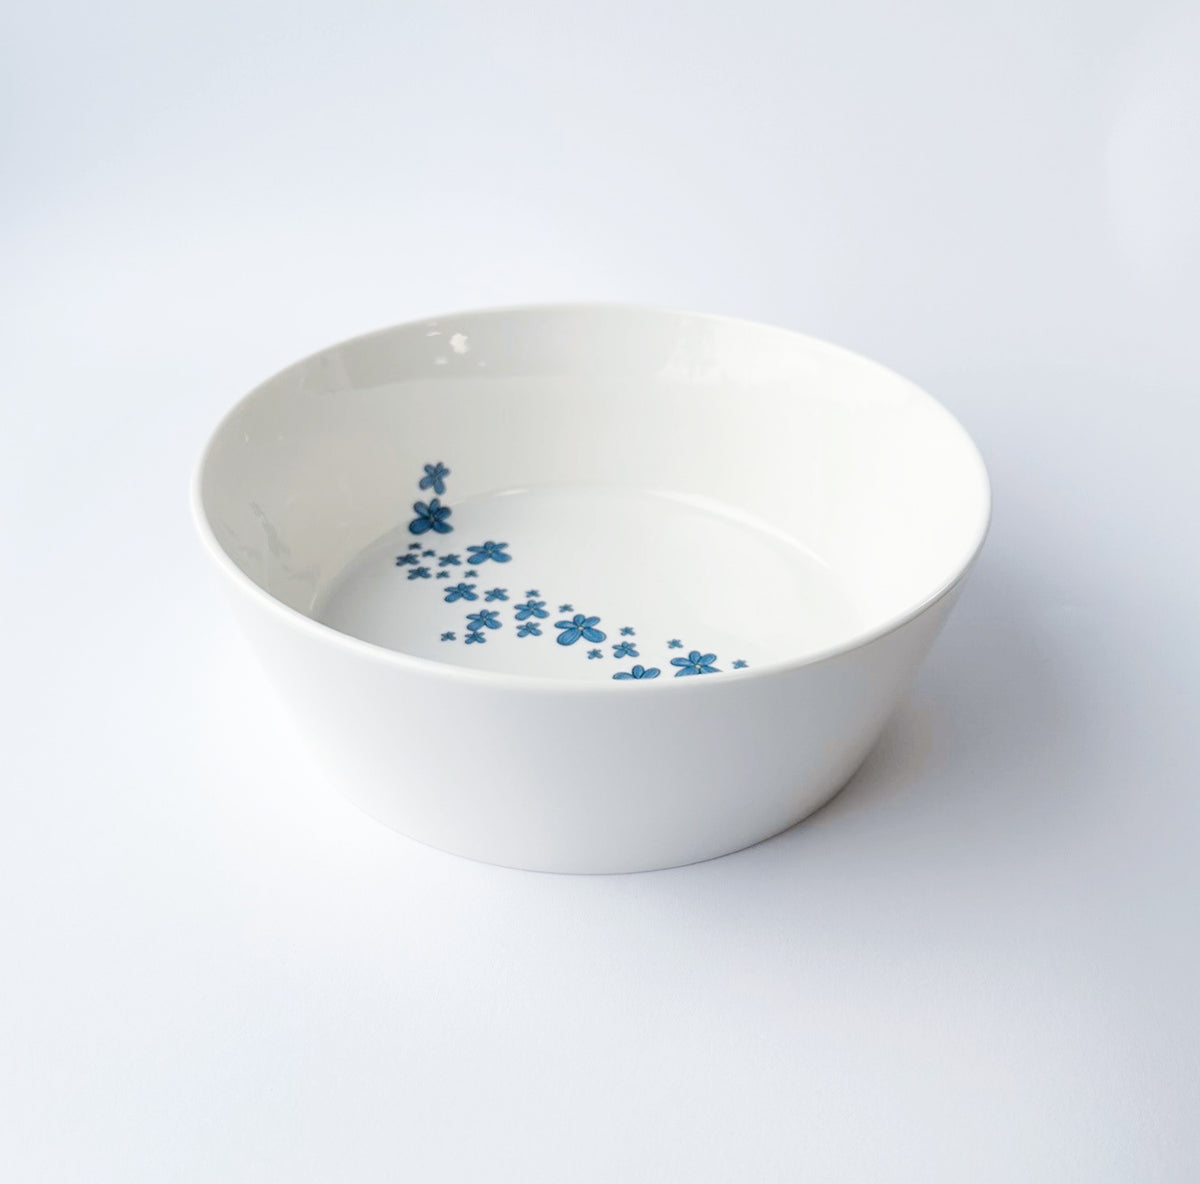 Forget-me-not cat bowl